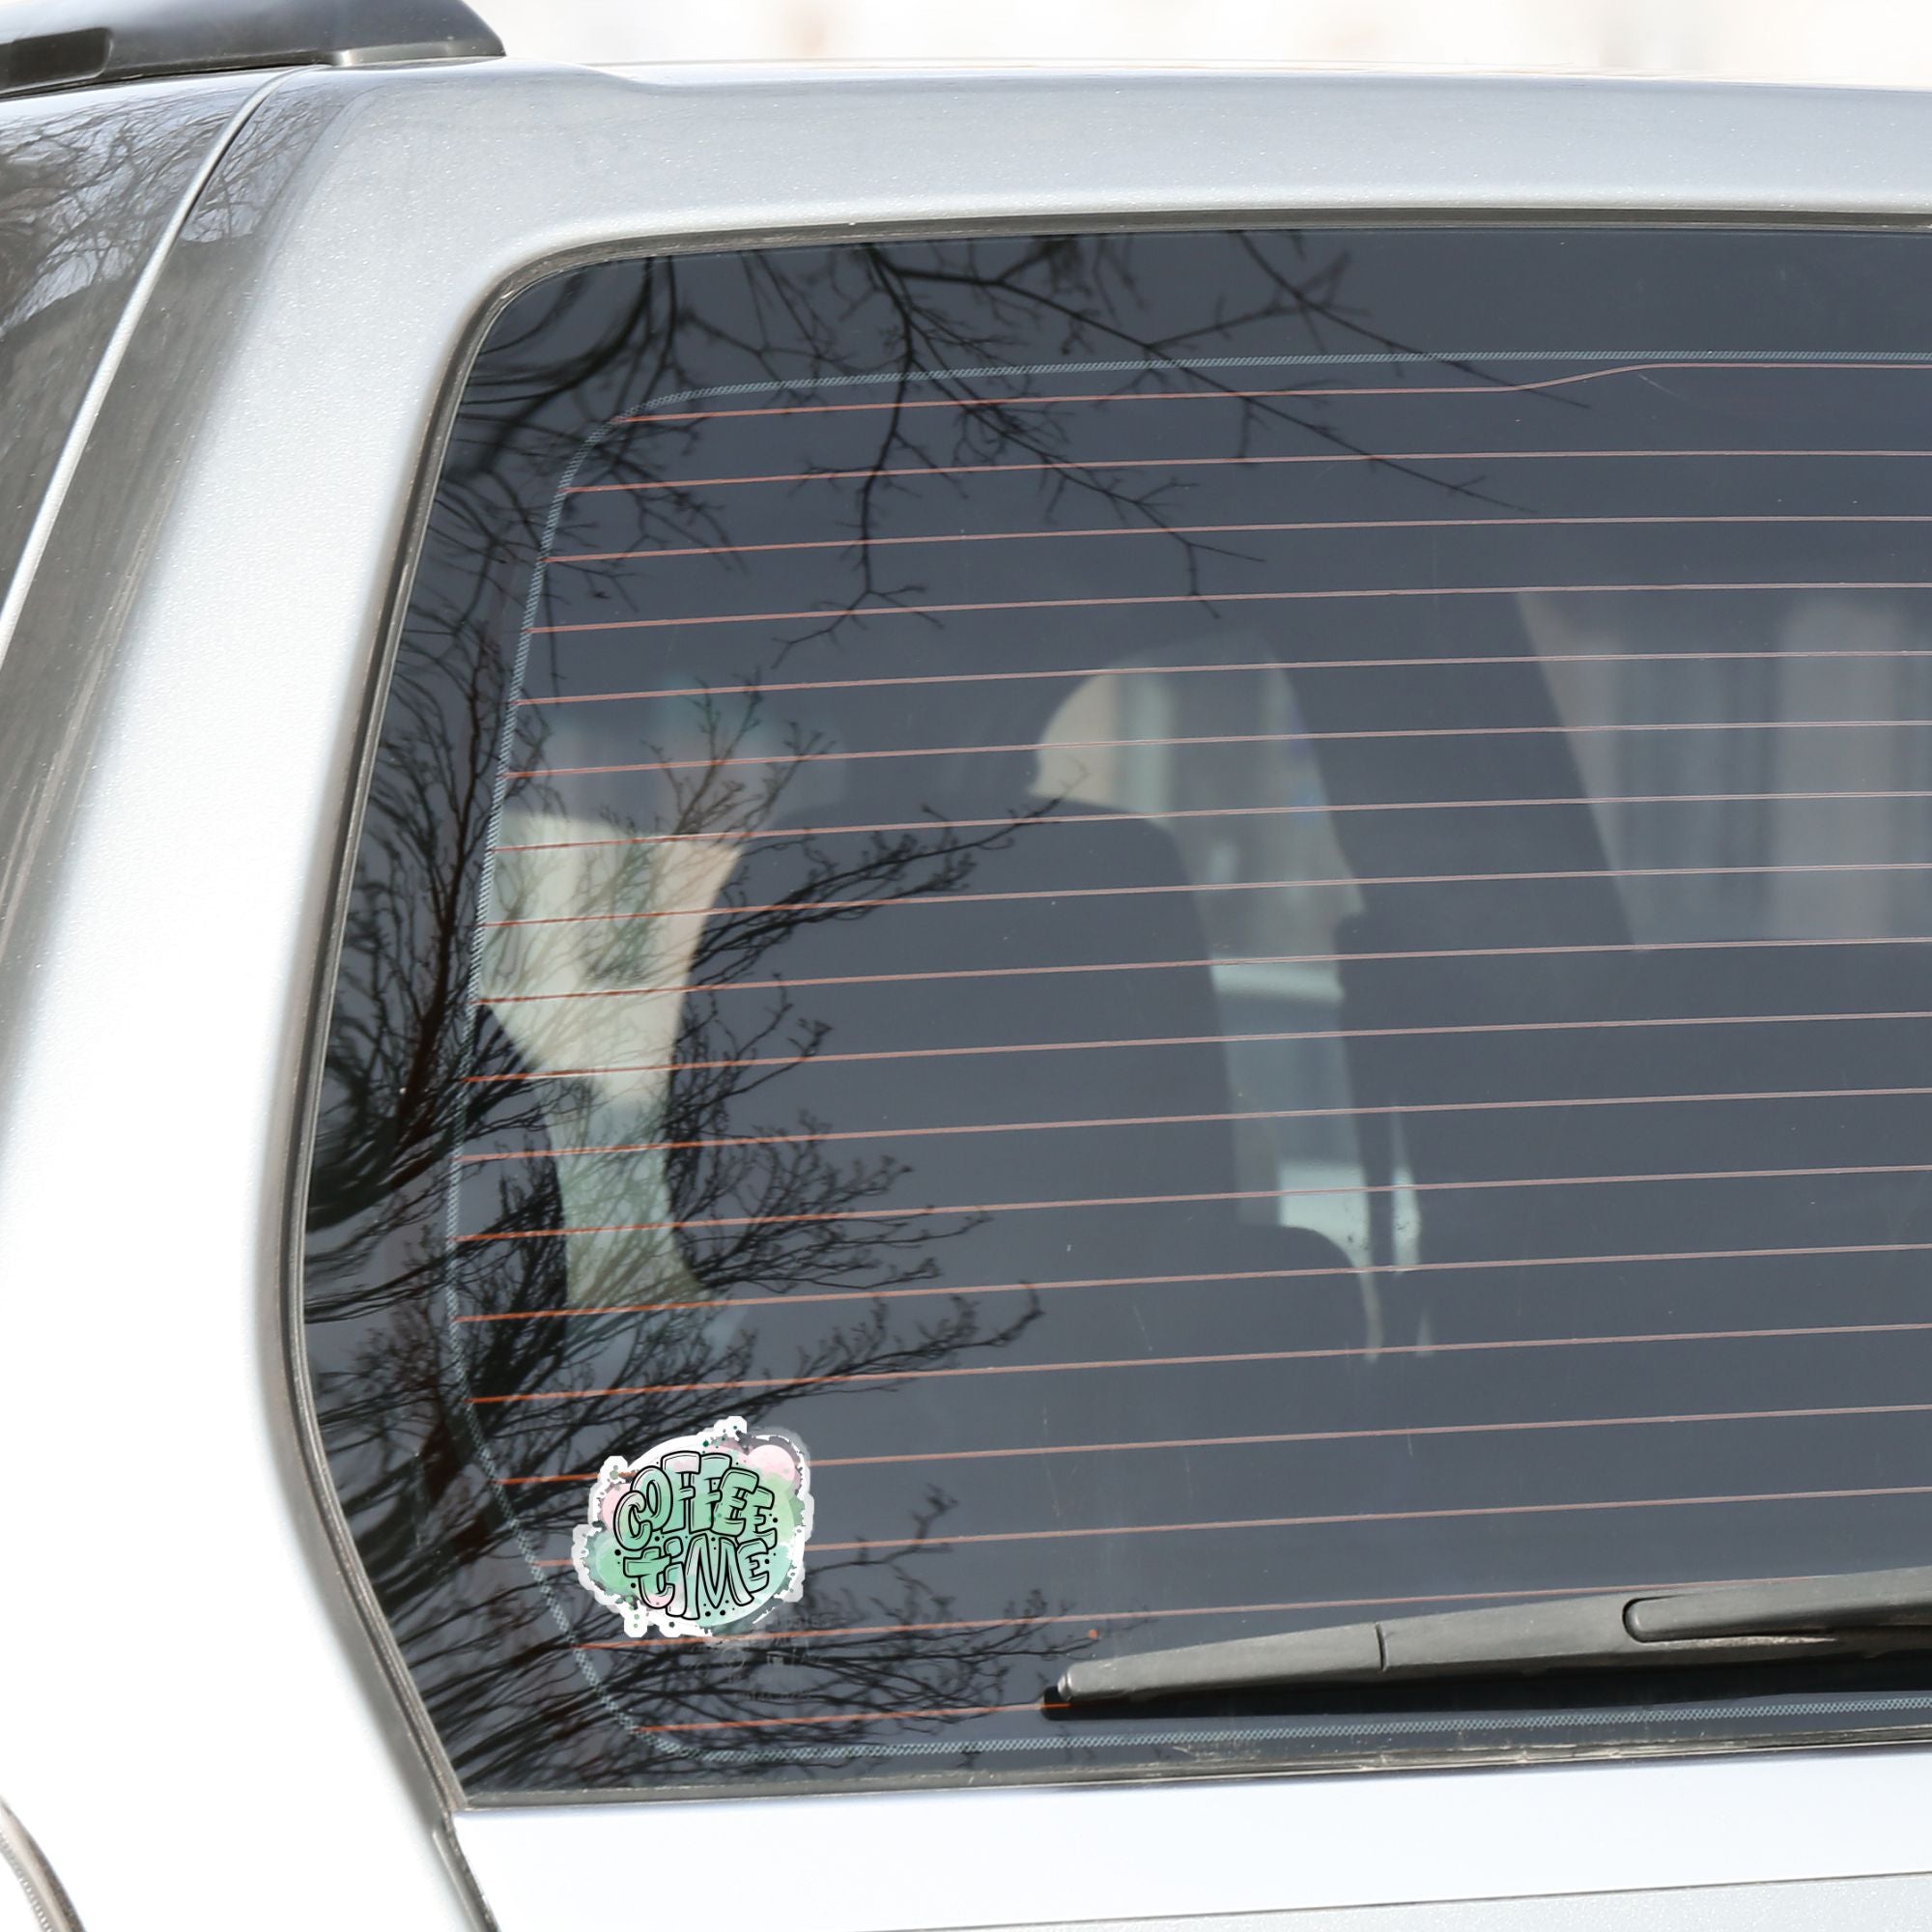 It's Coffee Time! This individual die-cut sticker features the words Coffee Time over a pastel green and pink background. This coffee sticker is great for all coffee lovers! This image shows the Coffee Time sticker on the back window of a car.